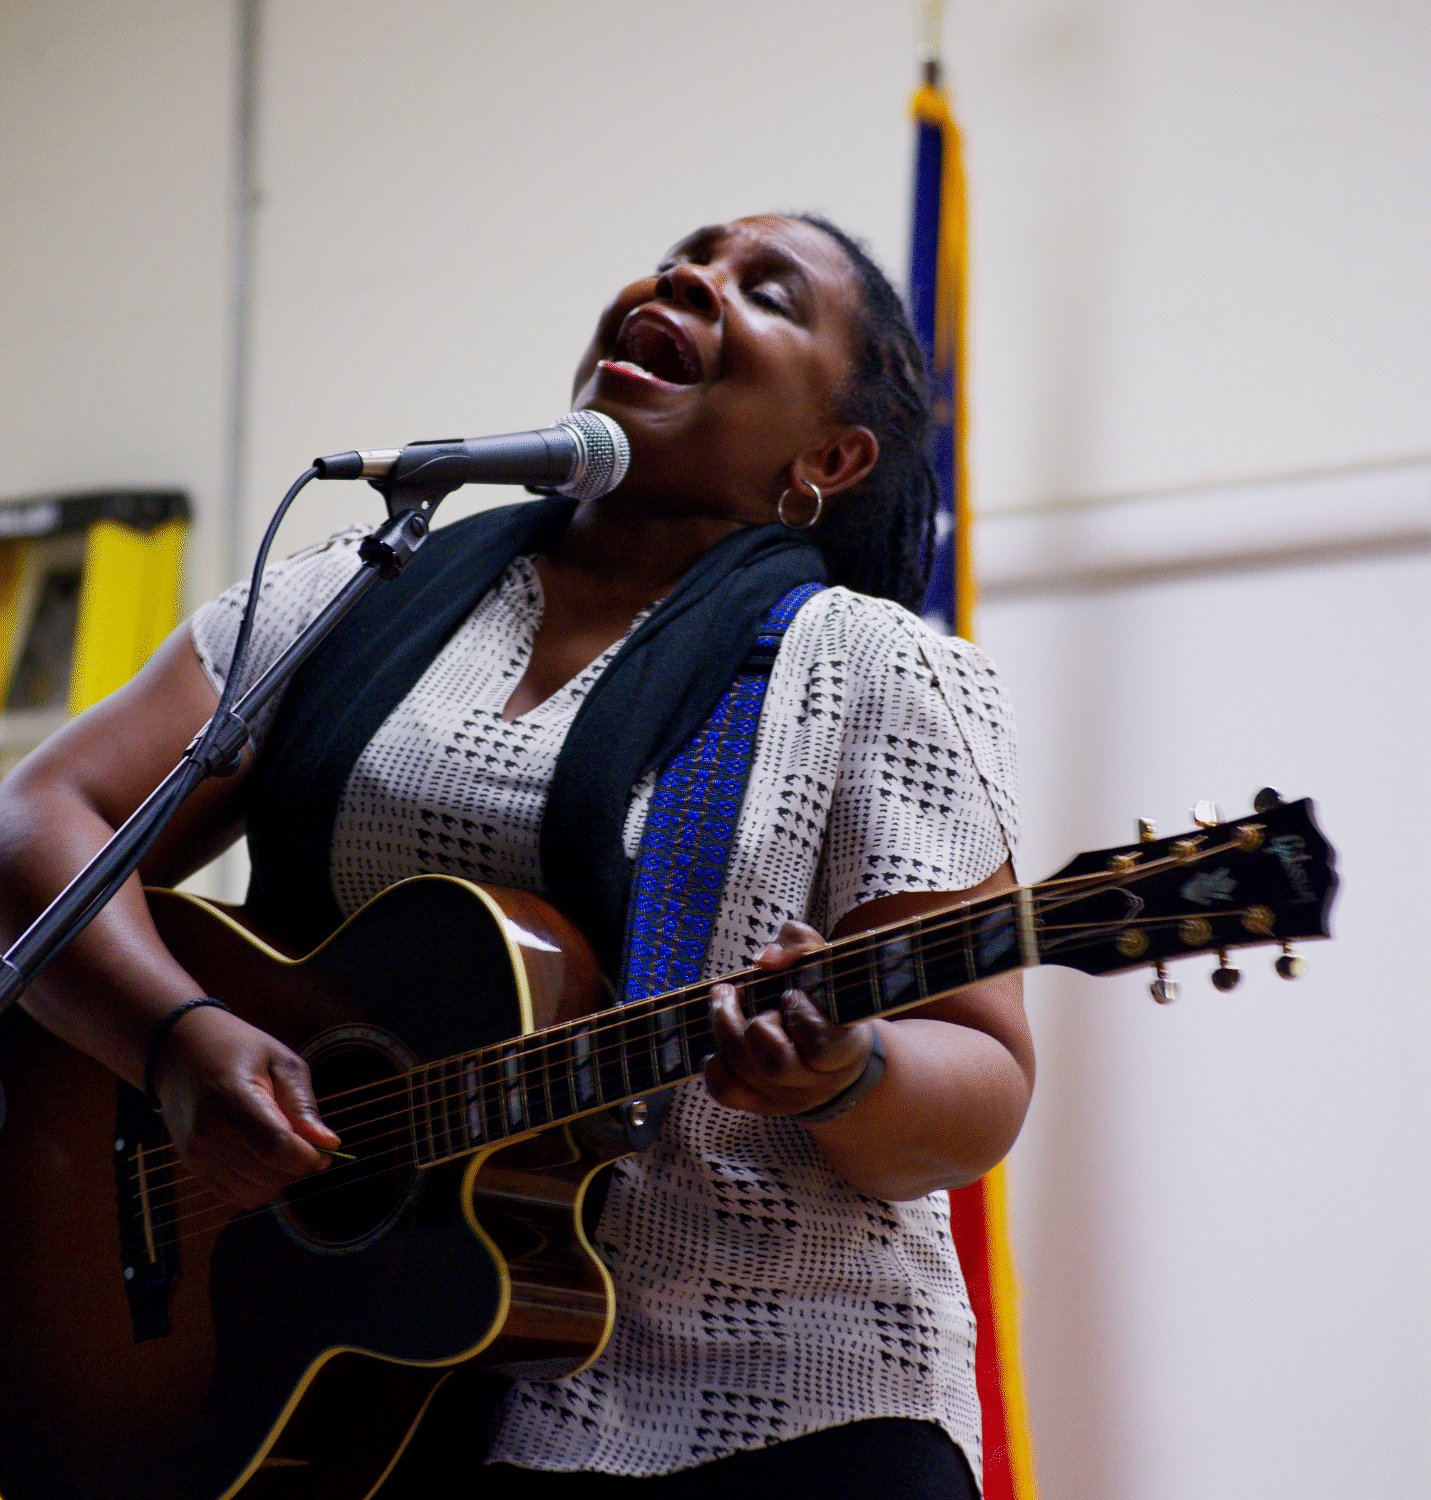 Ruthie Foster brought her brand of blues, soul and gospel music to the McFarland Center in Mineola Thursday as a celebration of Black History Month and Mineola’s sesquicentennial, sponsored by the Mineola Historical Museum. Foster was born in Mineola and has family here. She has toured around the world and been nominated for four Grammys.